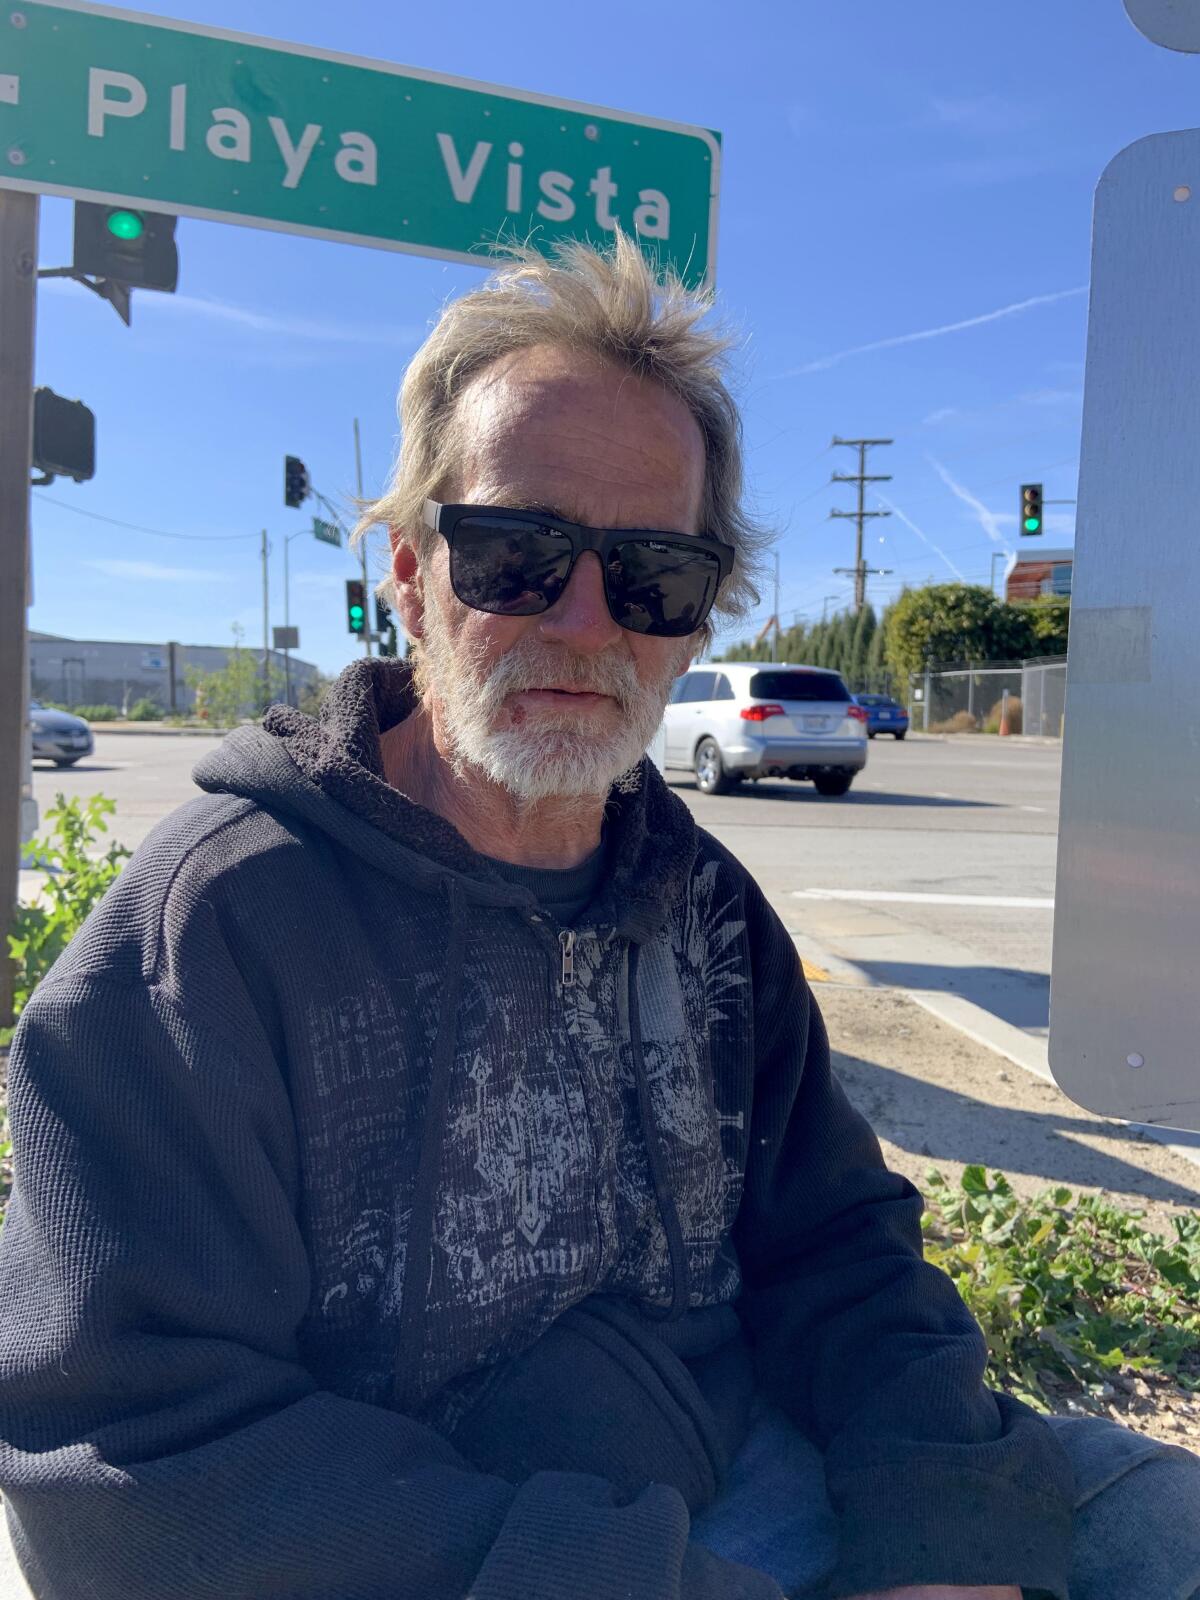 A man in sunglasses, with a street sign behind him that says "Playa Vista"